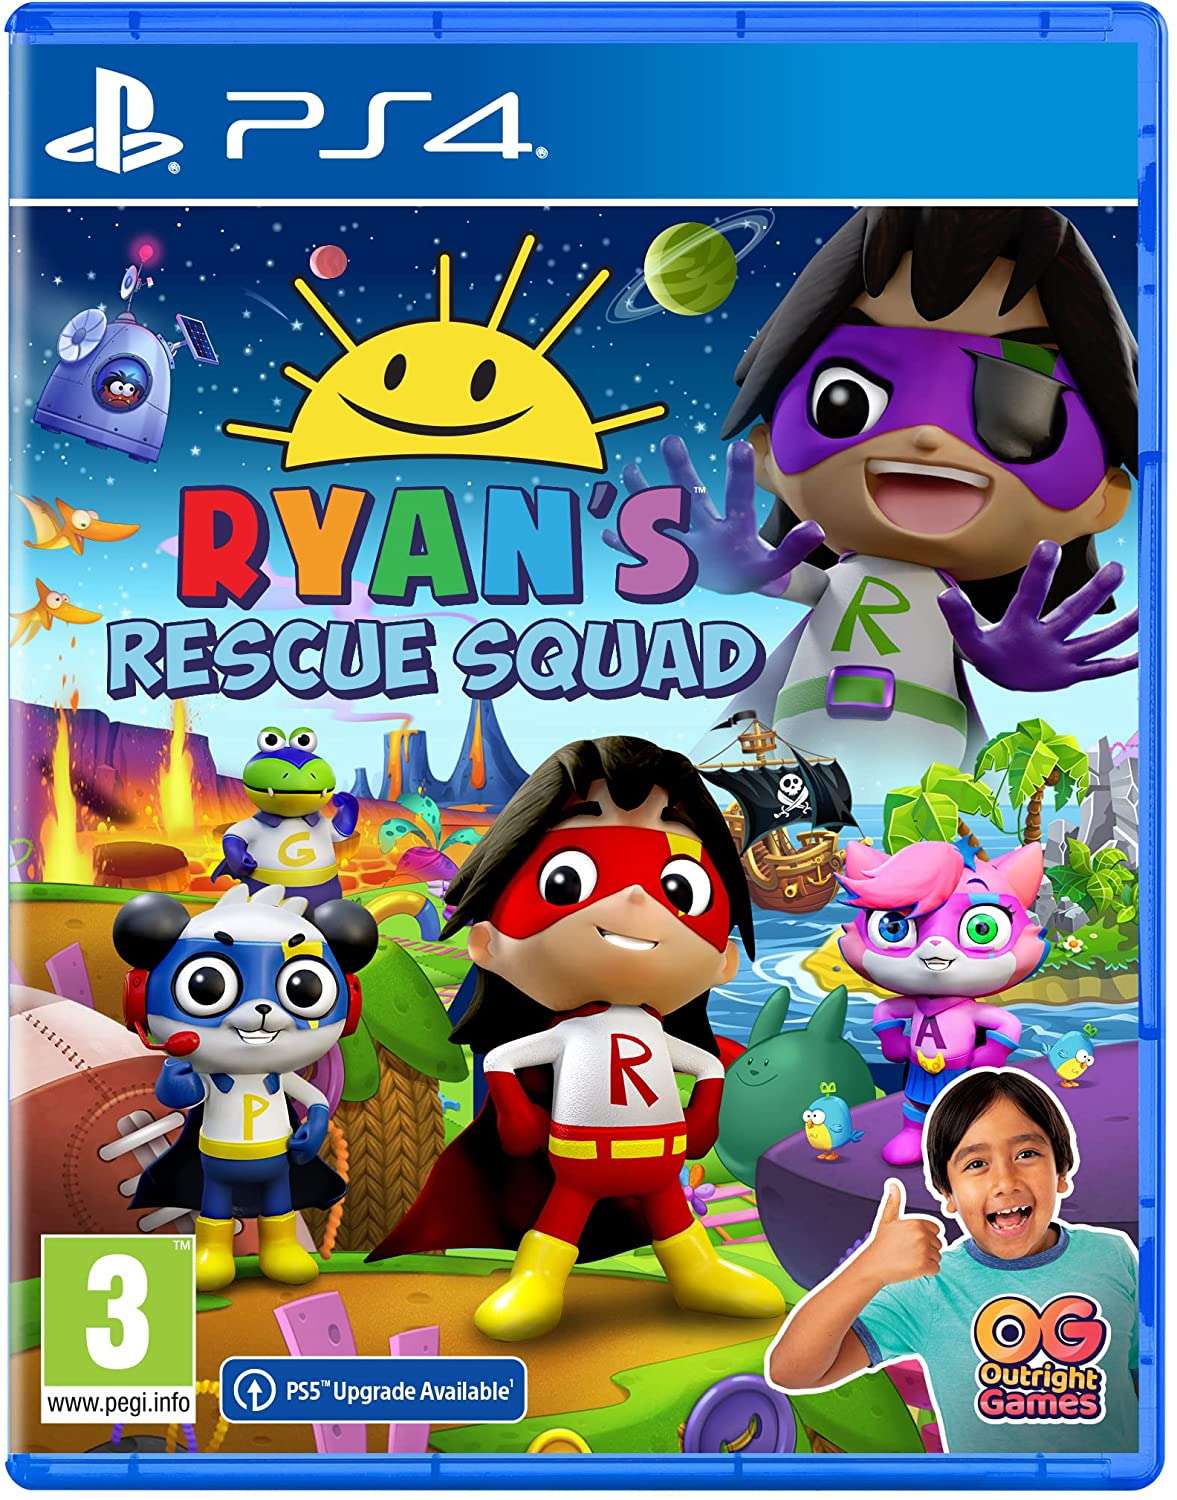 Ryans Rescue Squad for PS4 to rent